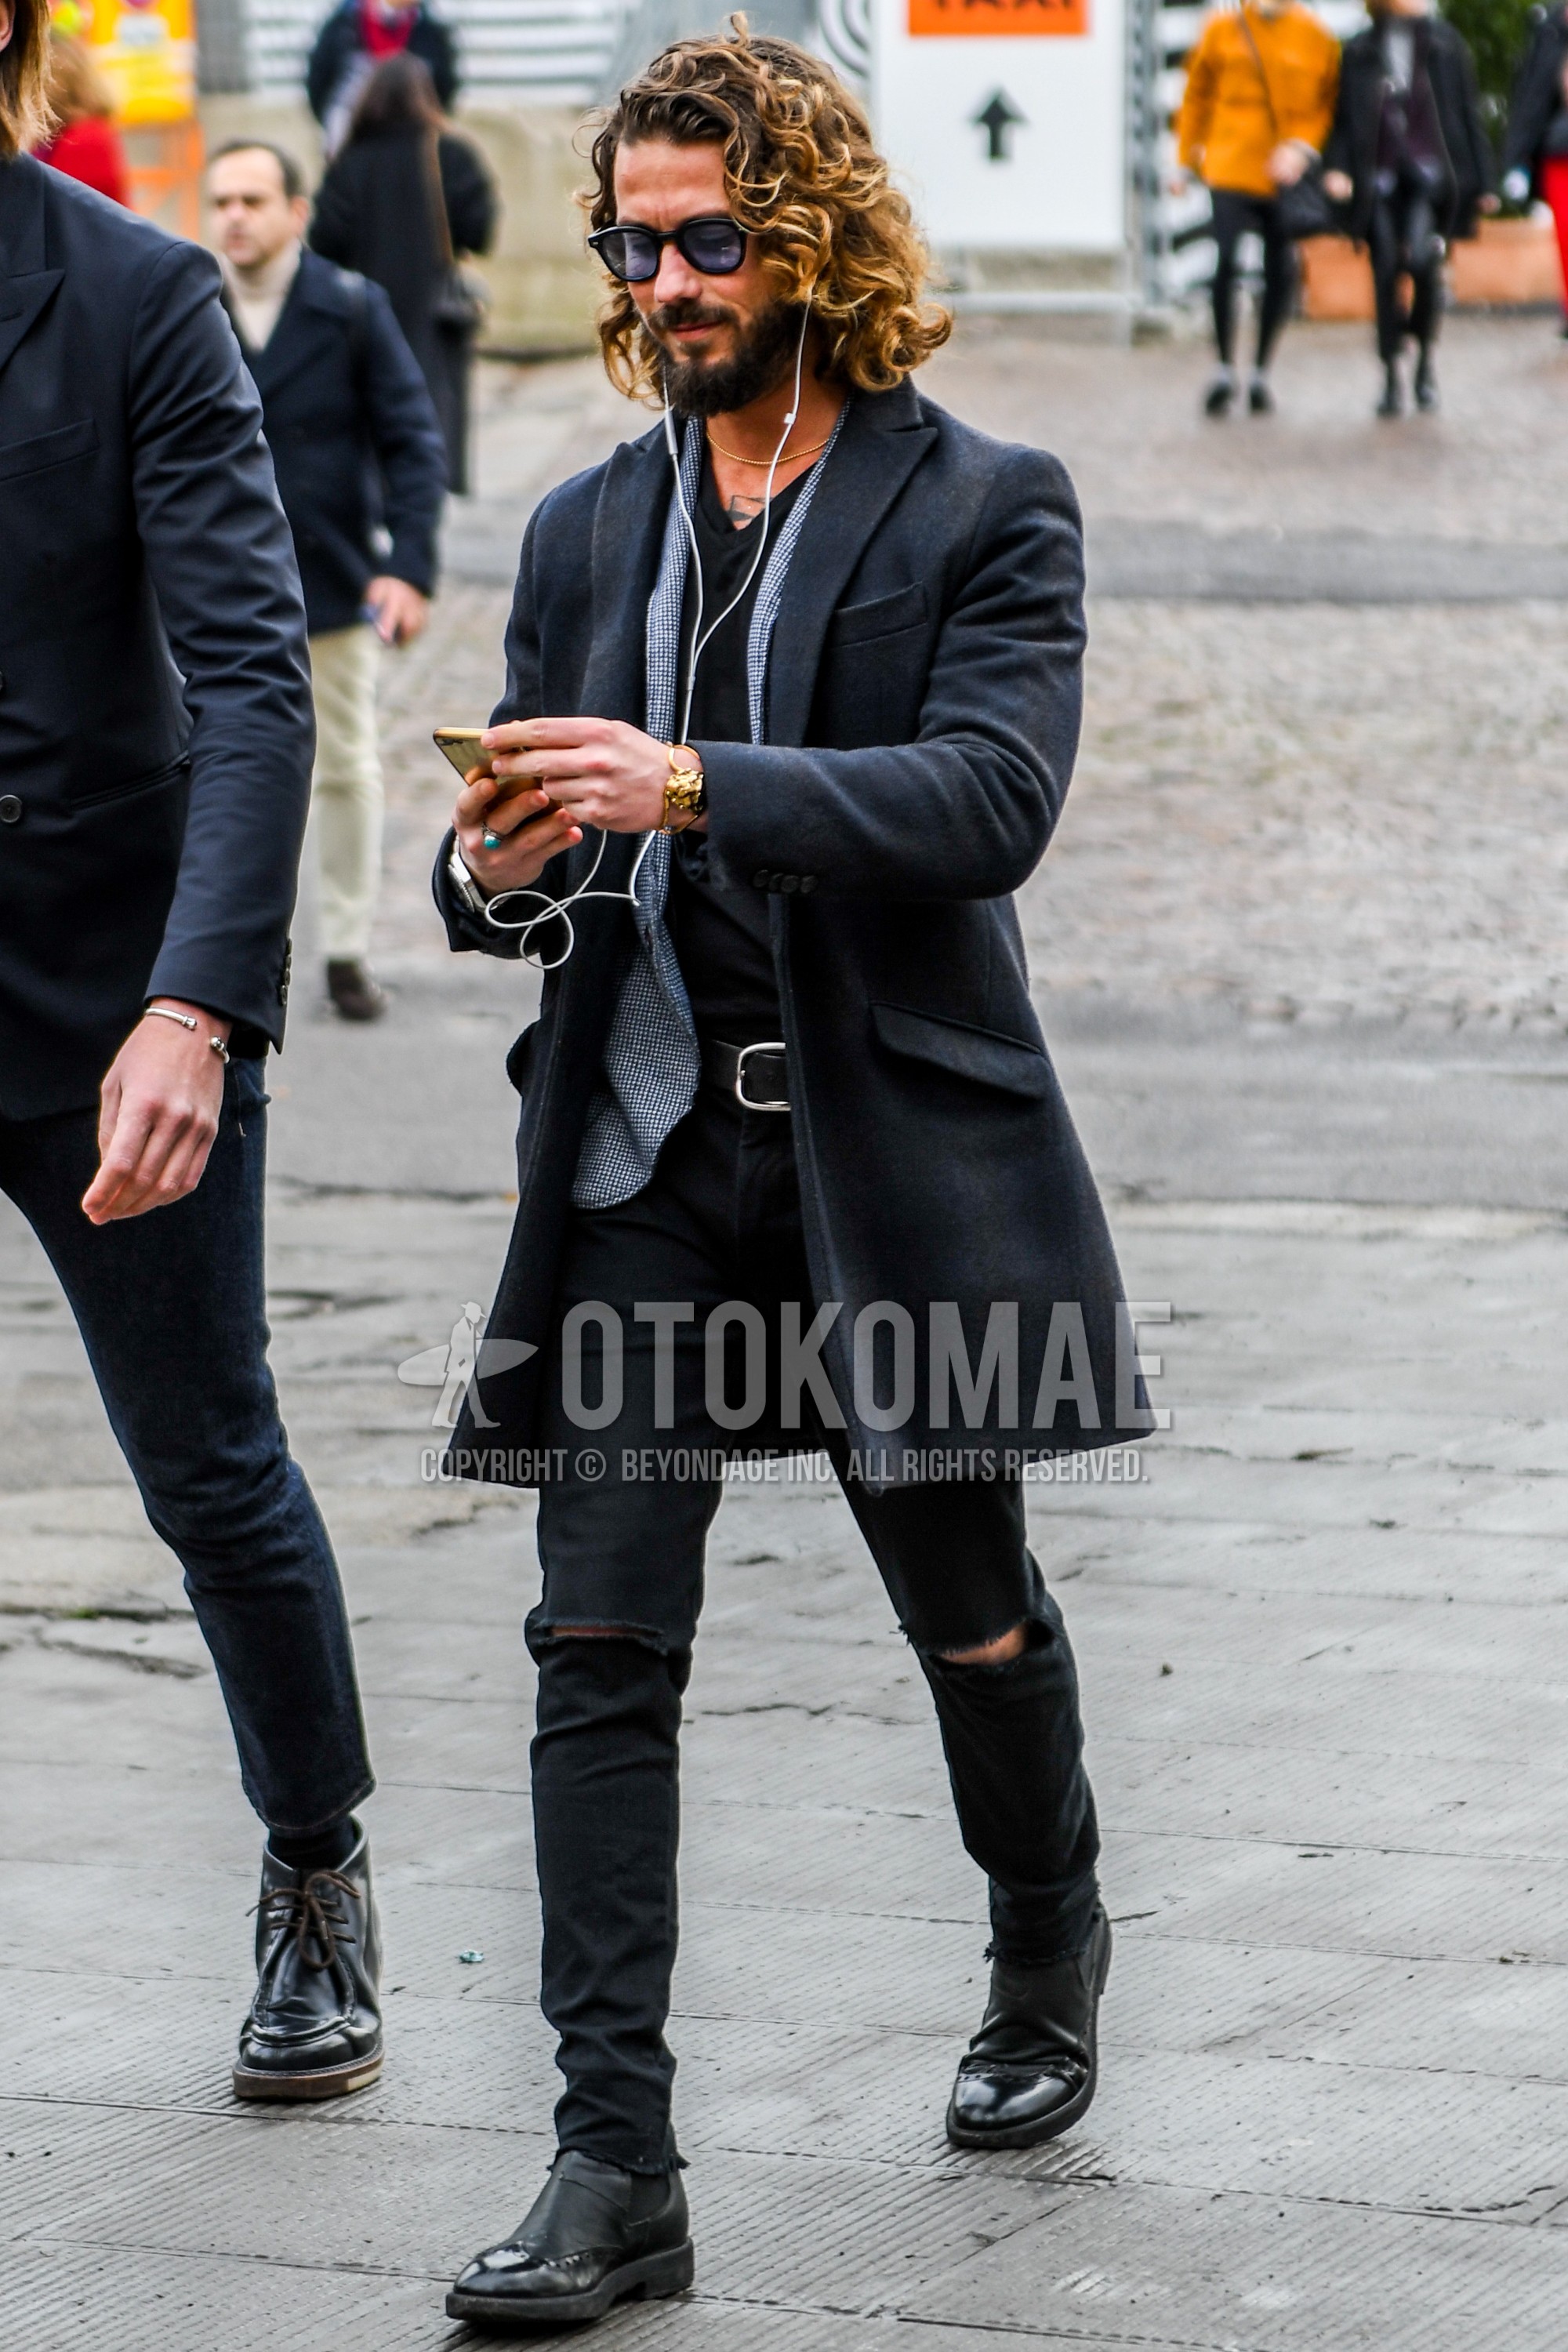 Men's autumn winter outfit with plain sunglasses, black plain chester coat, gray tops/innerwear tailored jacket, black plain t-shirt, black plain damaged jeans, black side-gore boots.